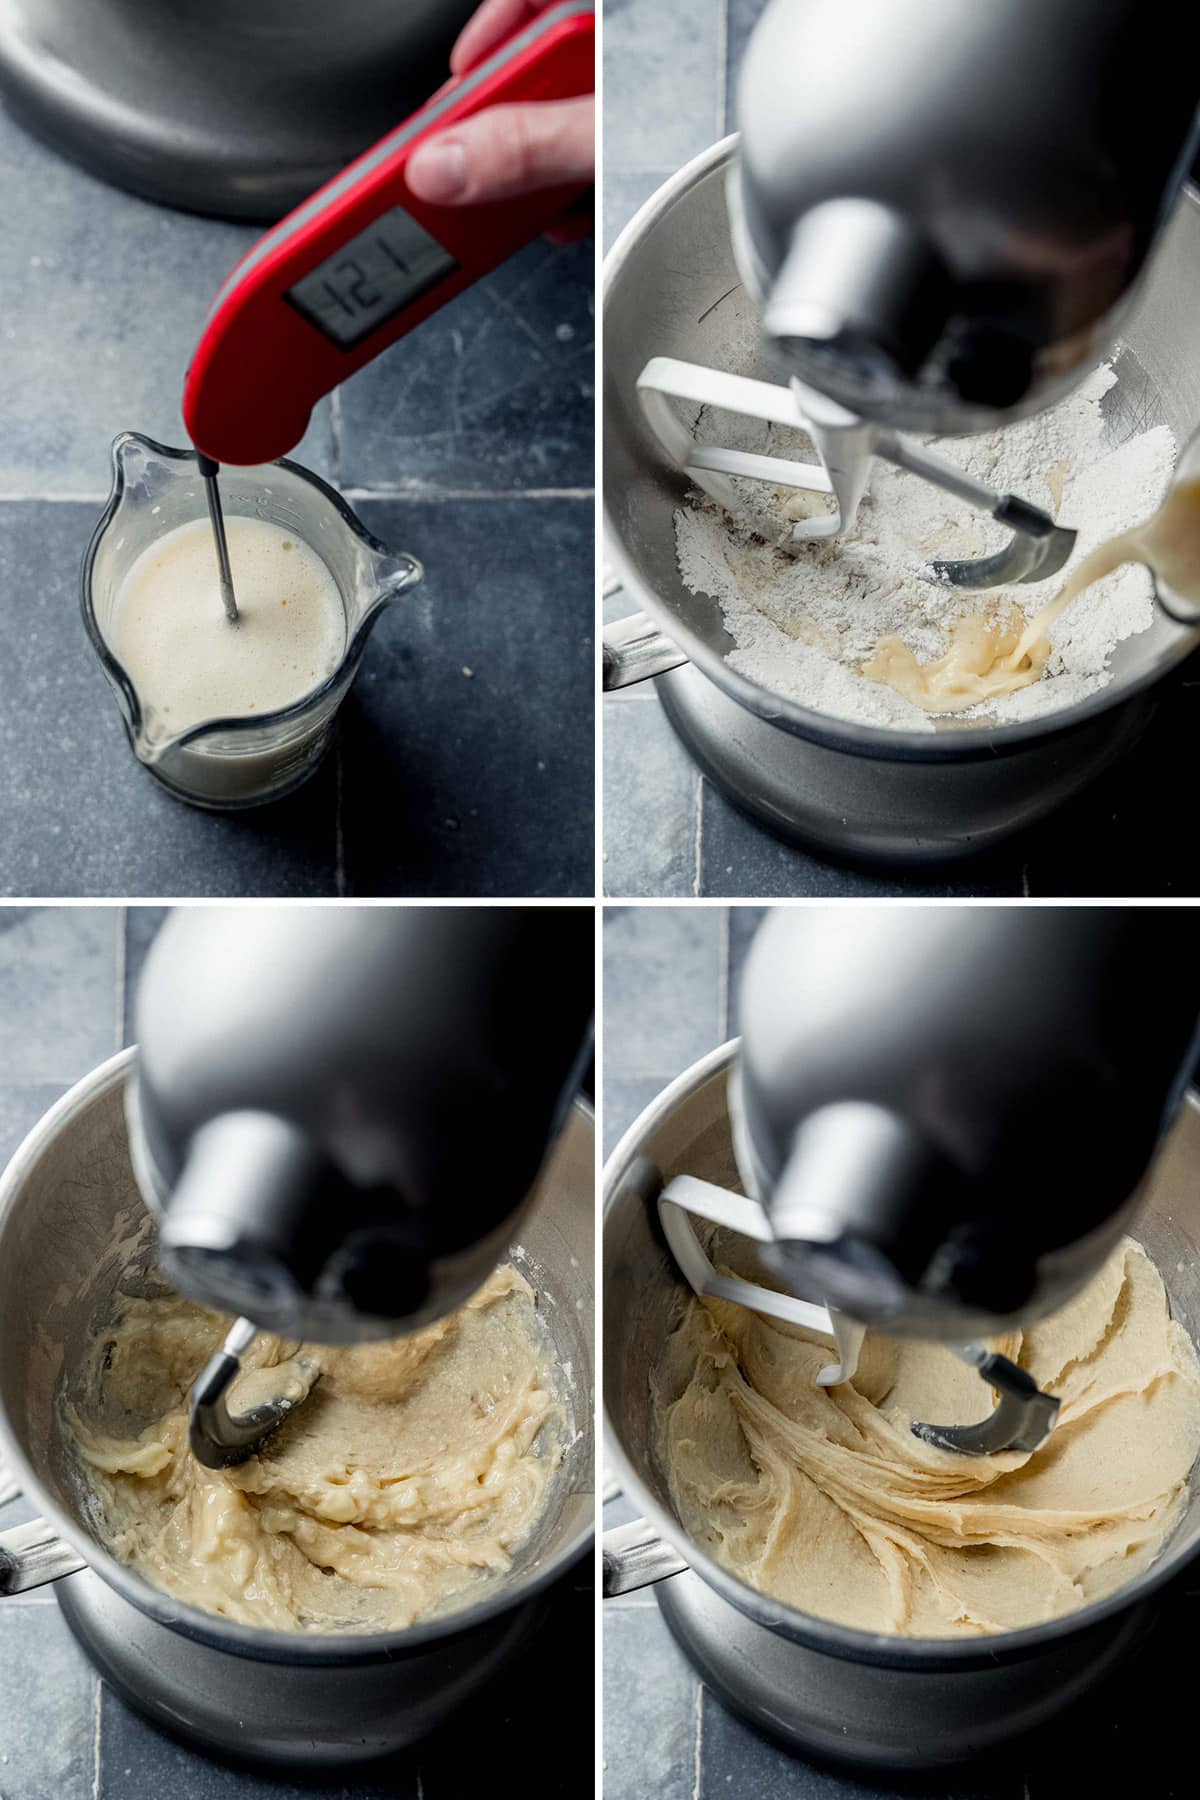 Image collage: measuring temperature of liquids, pouring milk into stand mixer bowl with dry ingredients, mixer mixing the batter.